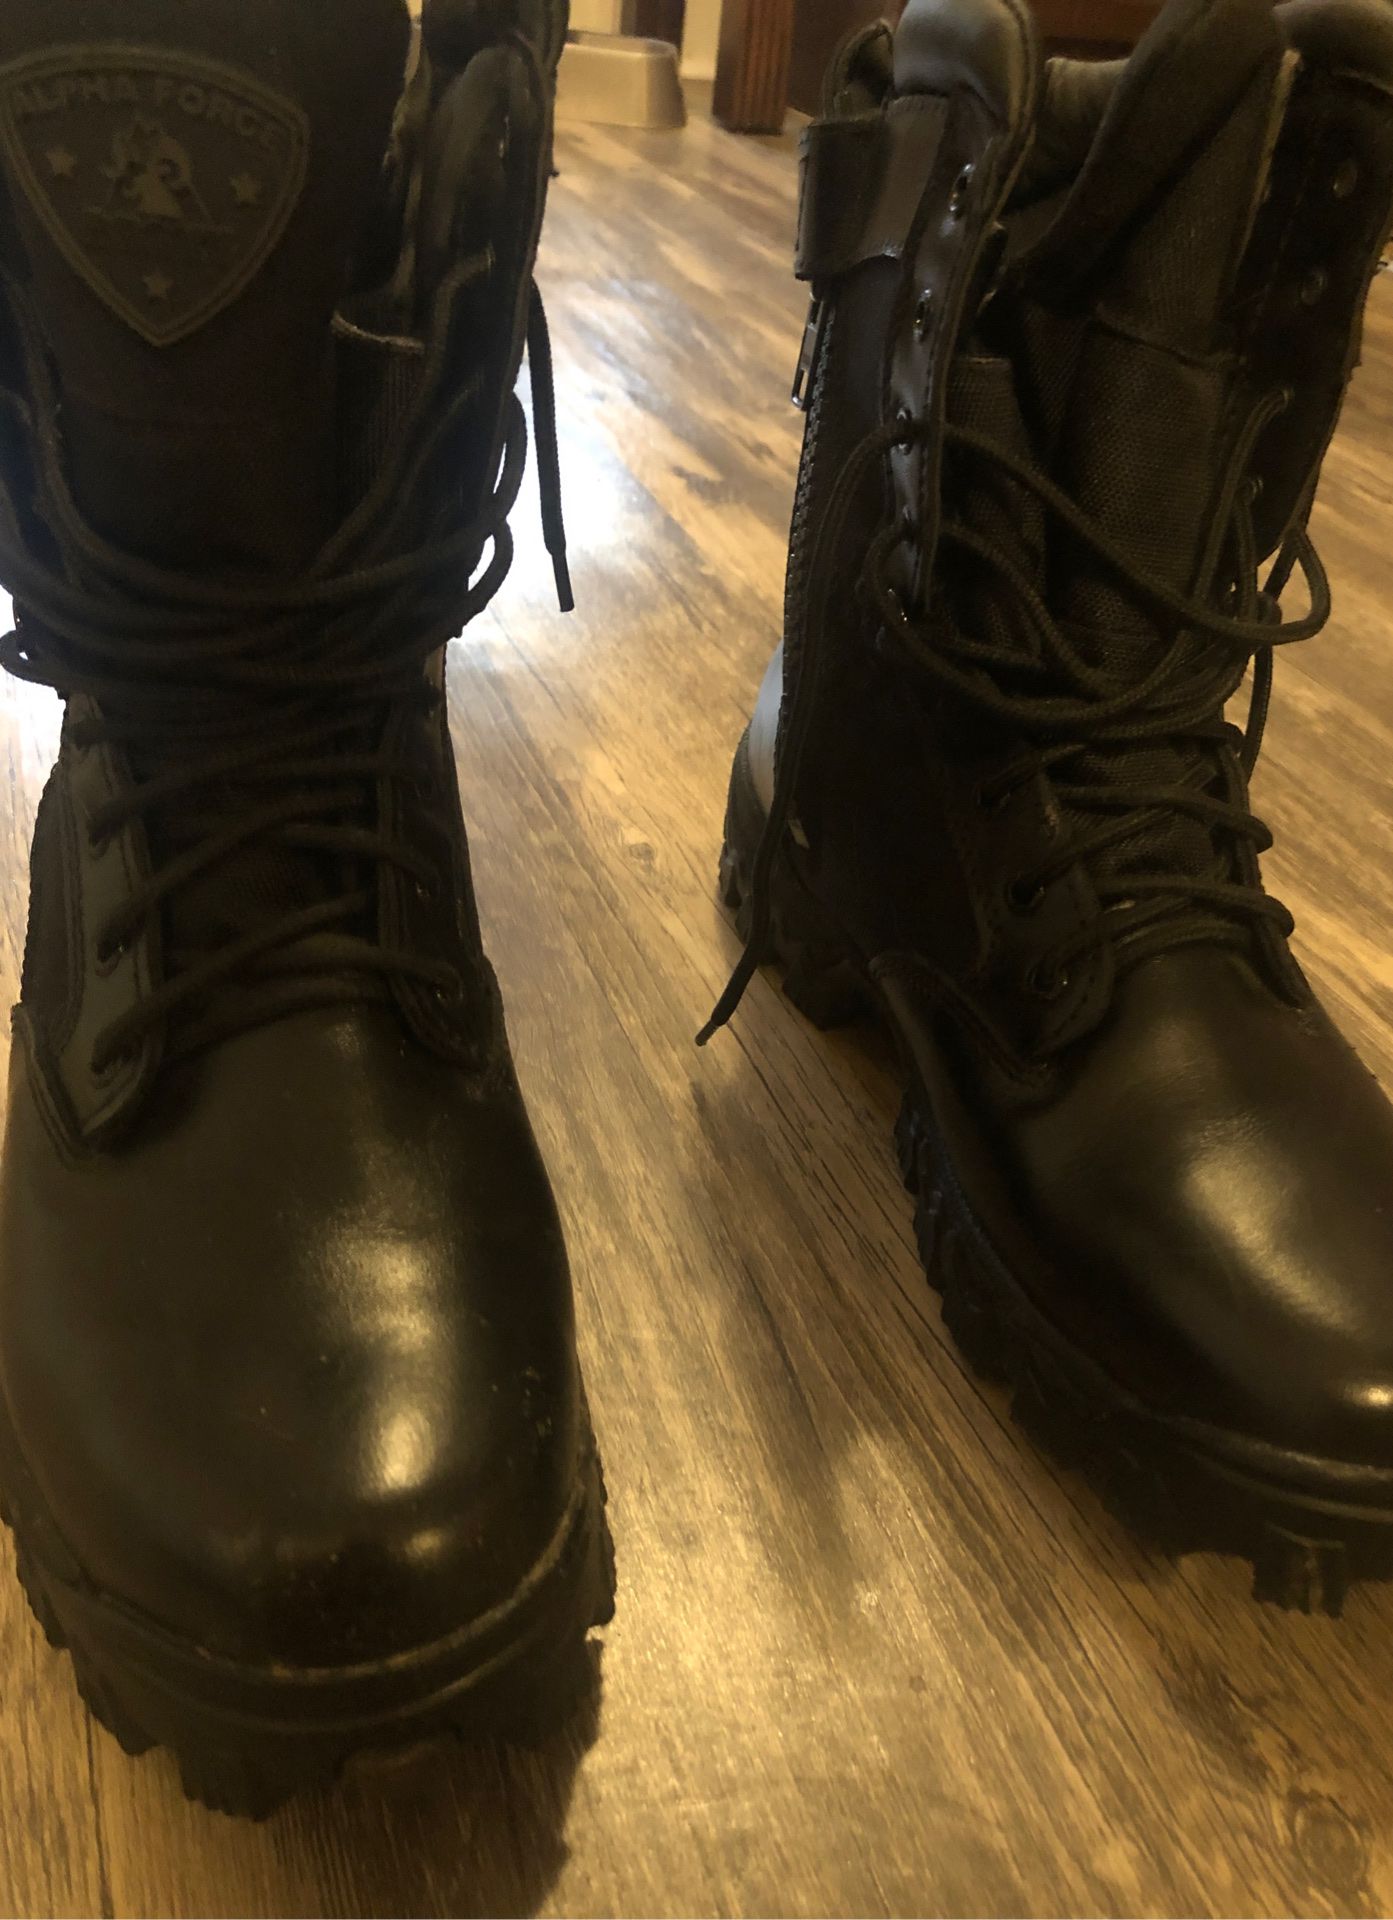 Work boots/Tactical boots 10.5